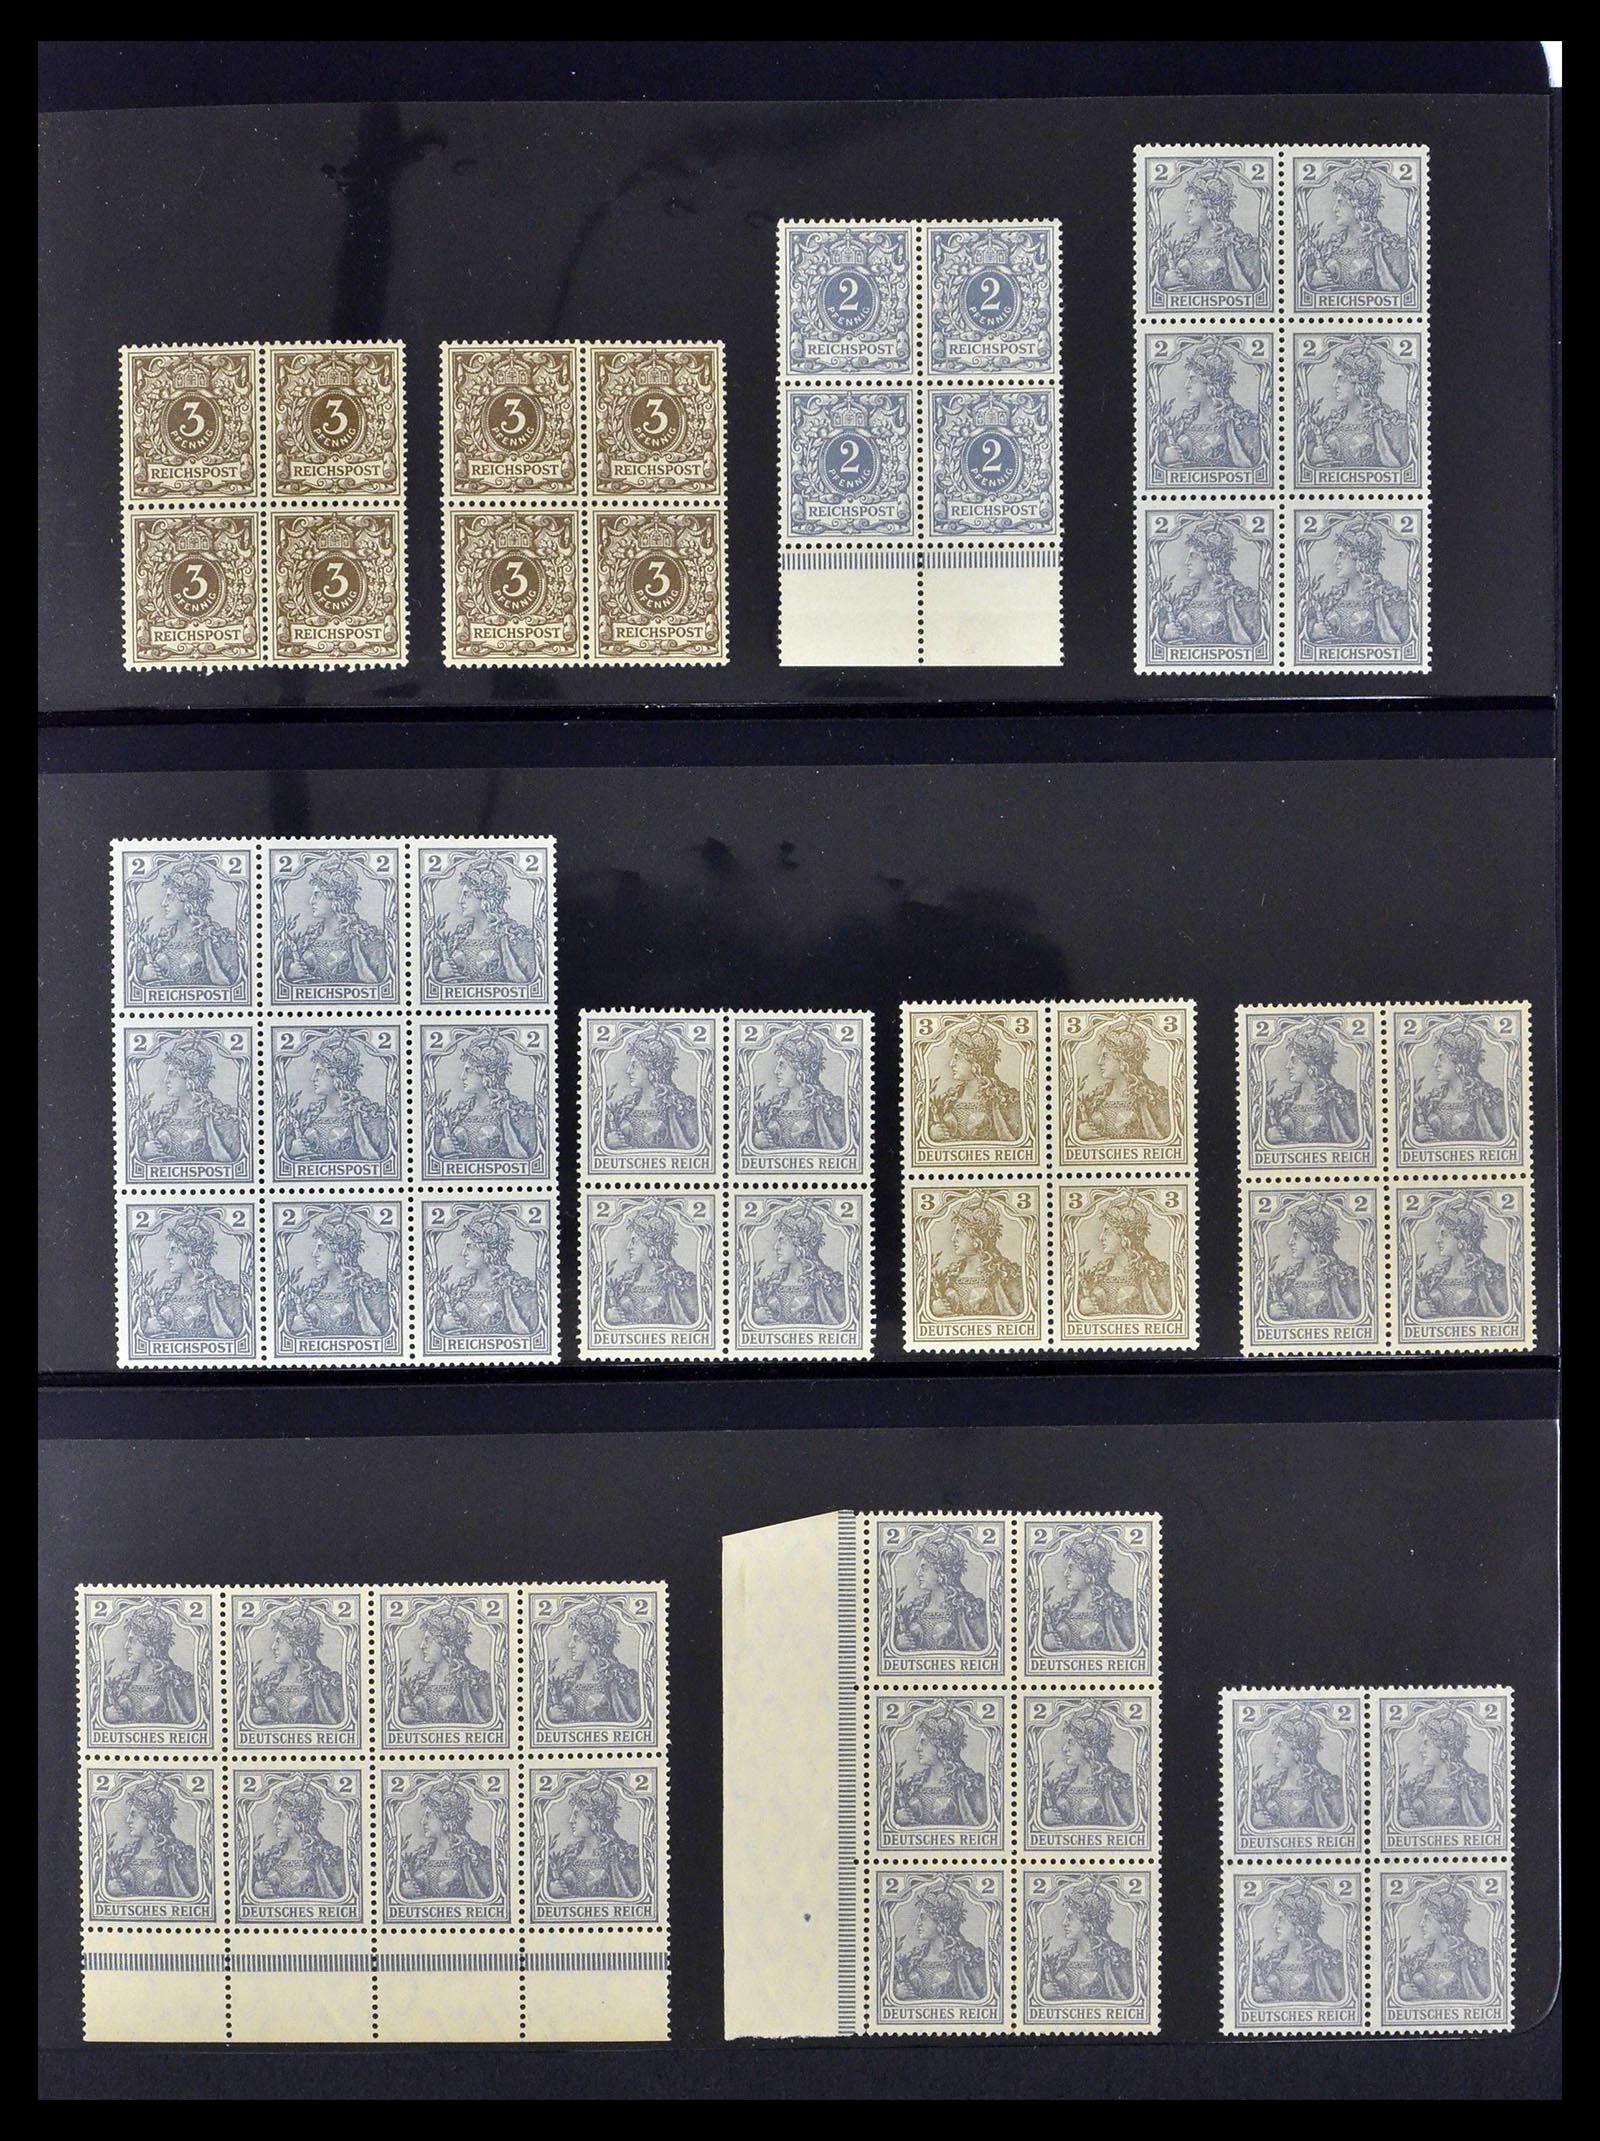 39255 0001 - Stamp collection 39255 German Reich MNH blocks of 4.